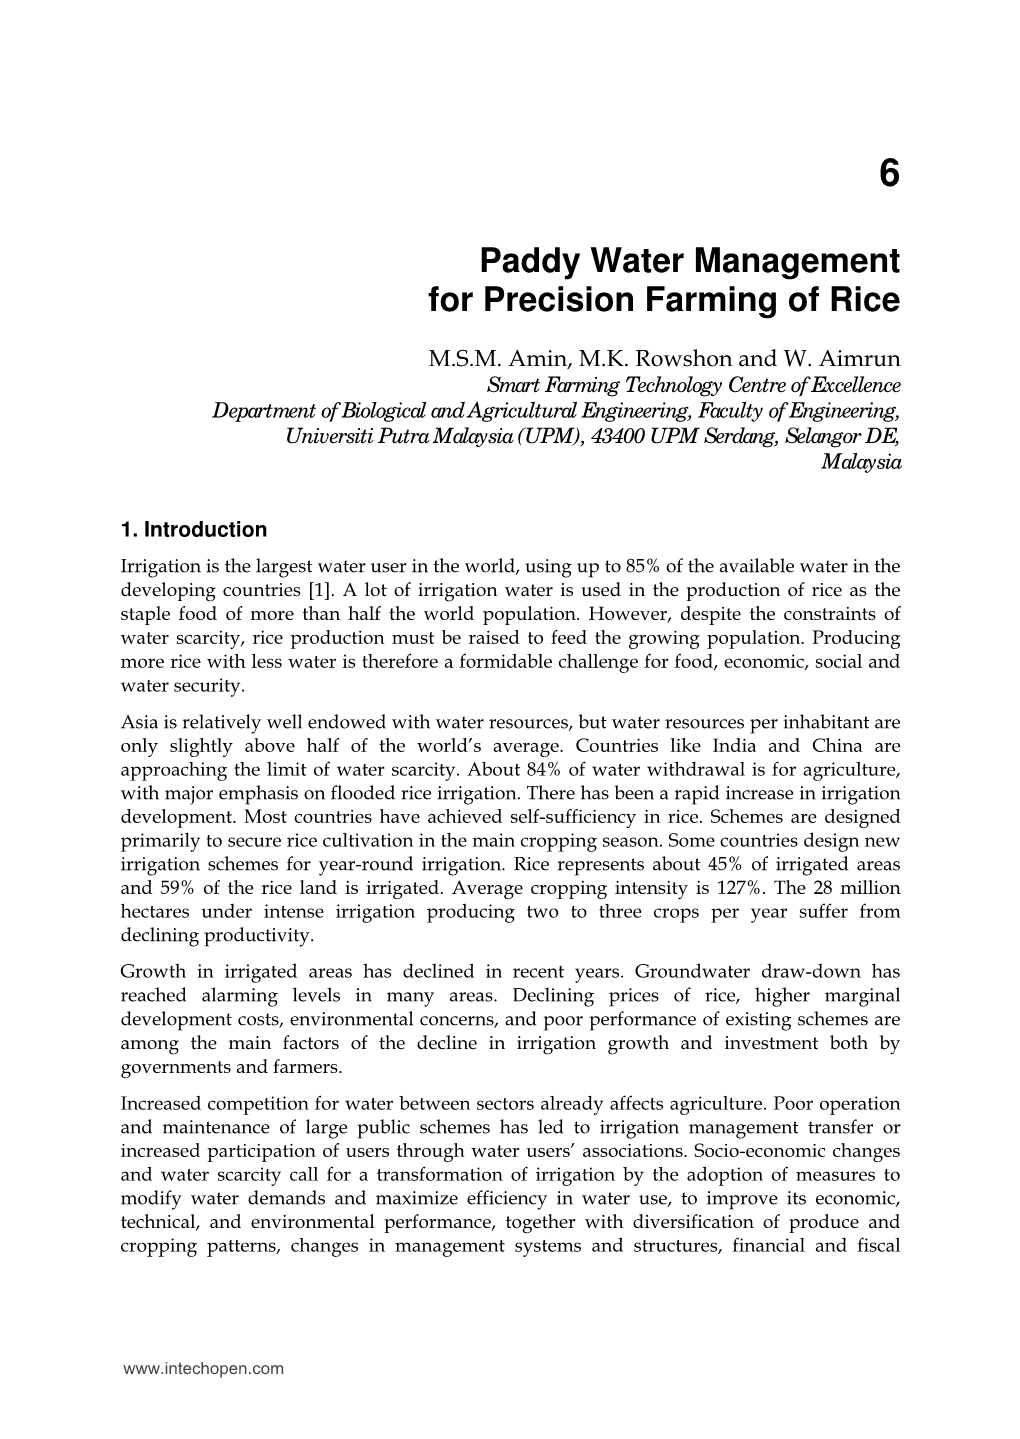 Paddy Water Management for Precision Farming of Rice